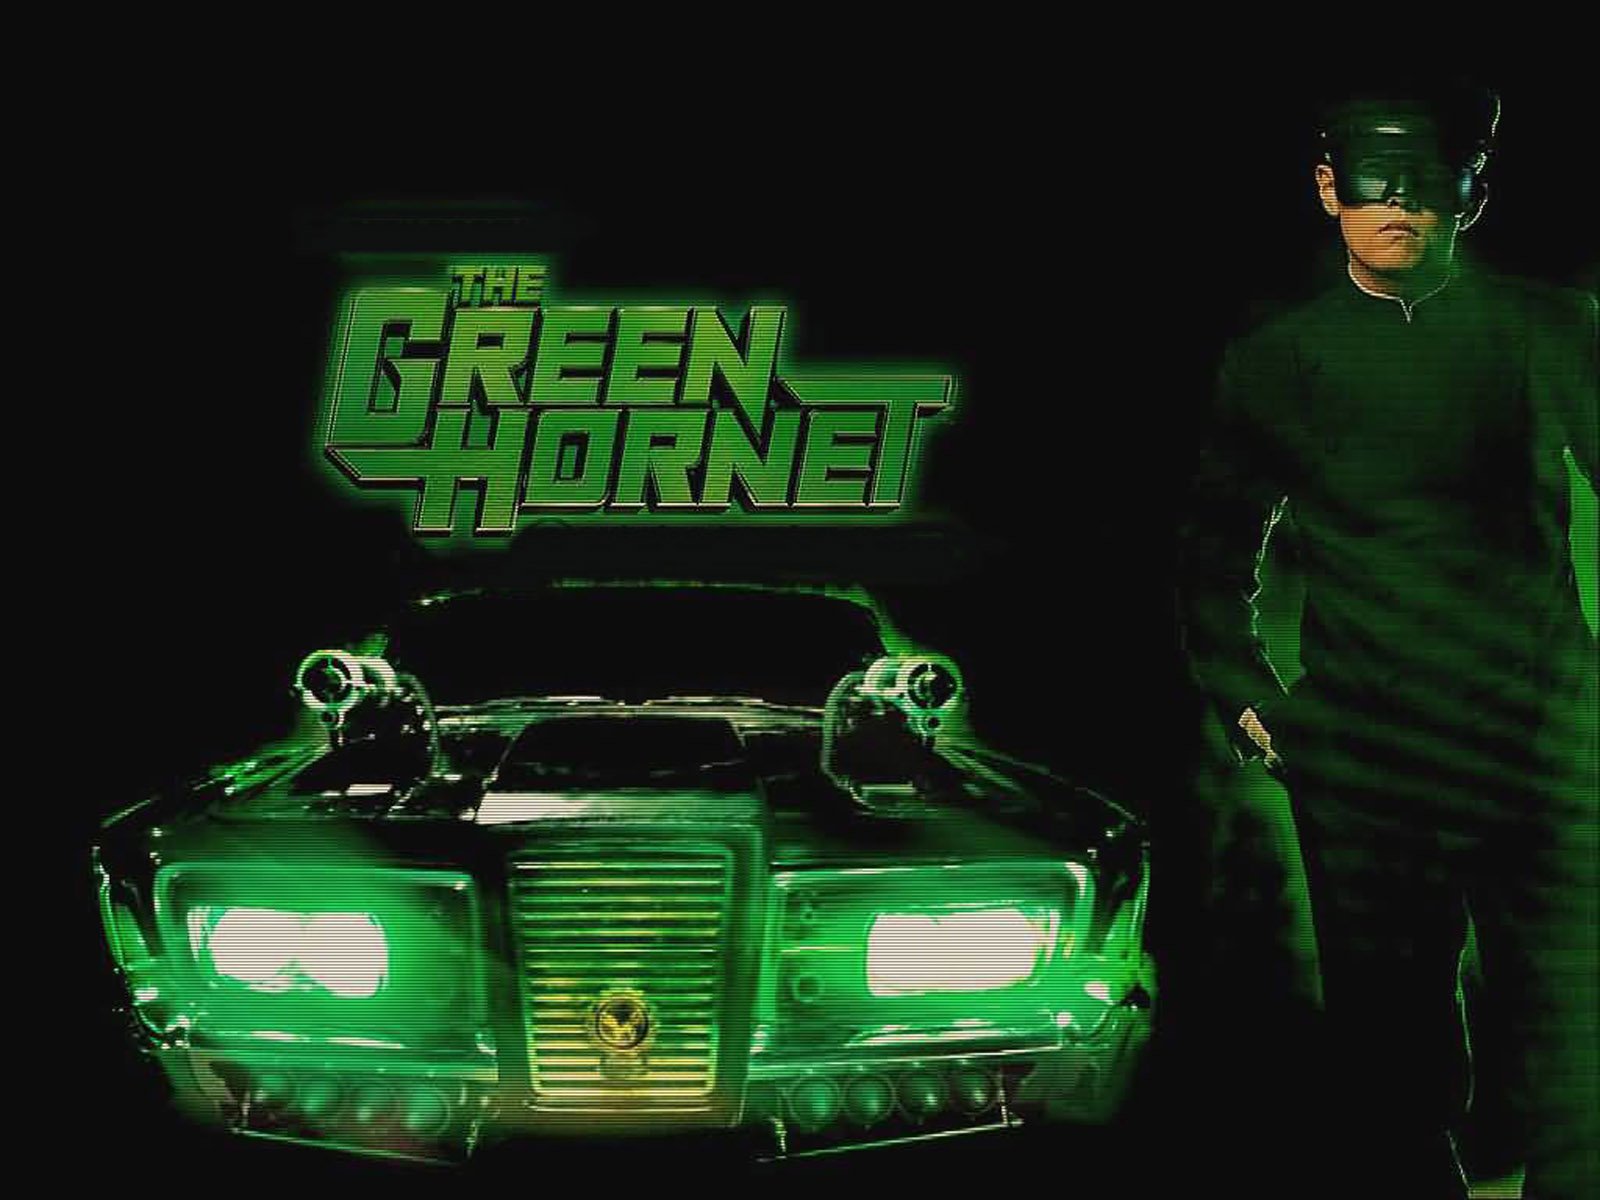 The Green Hornet Image Id 137361 Image Abyss